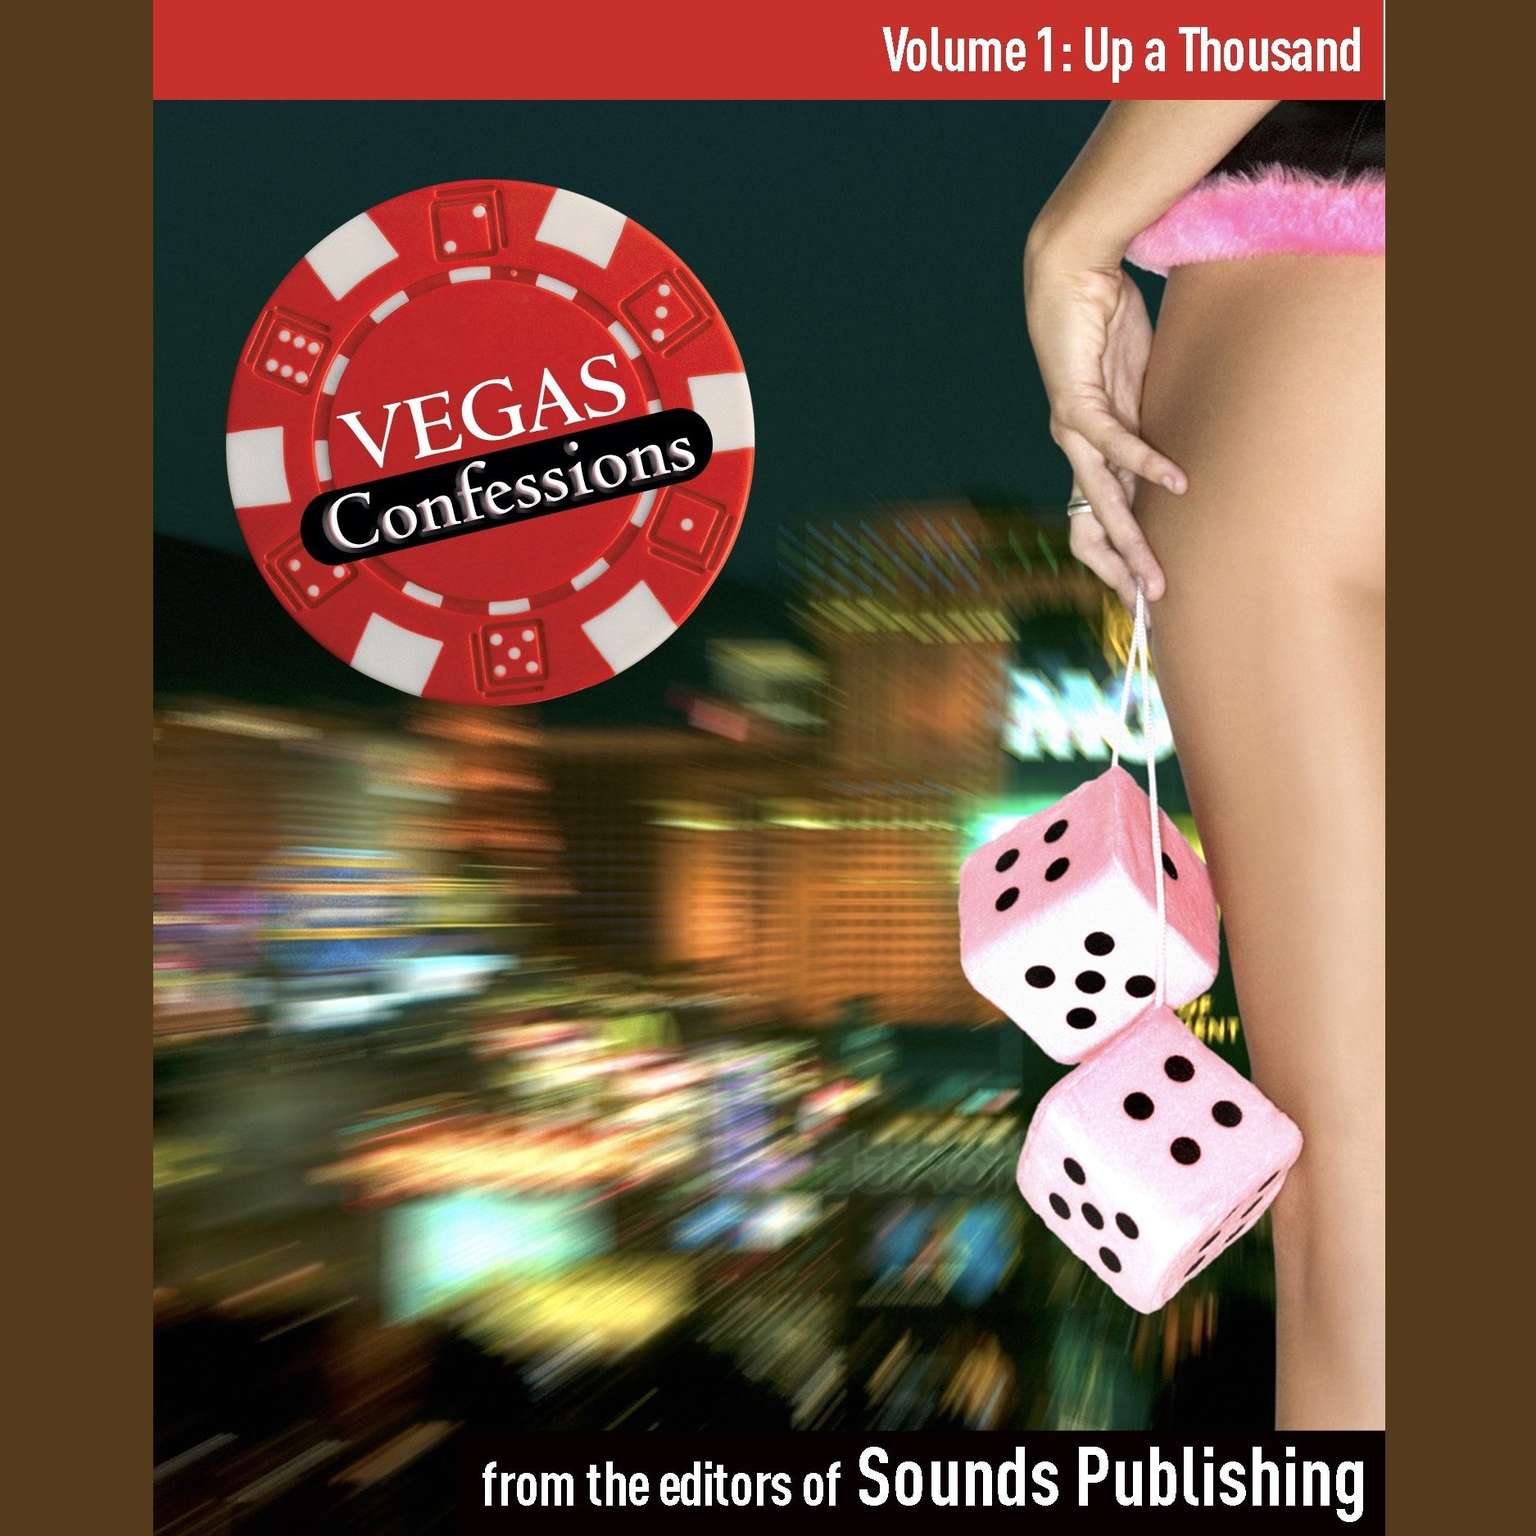 Vegas Confessions 1: Up a Thousand Audiobook, by The Editors of Sounds Publishing